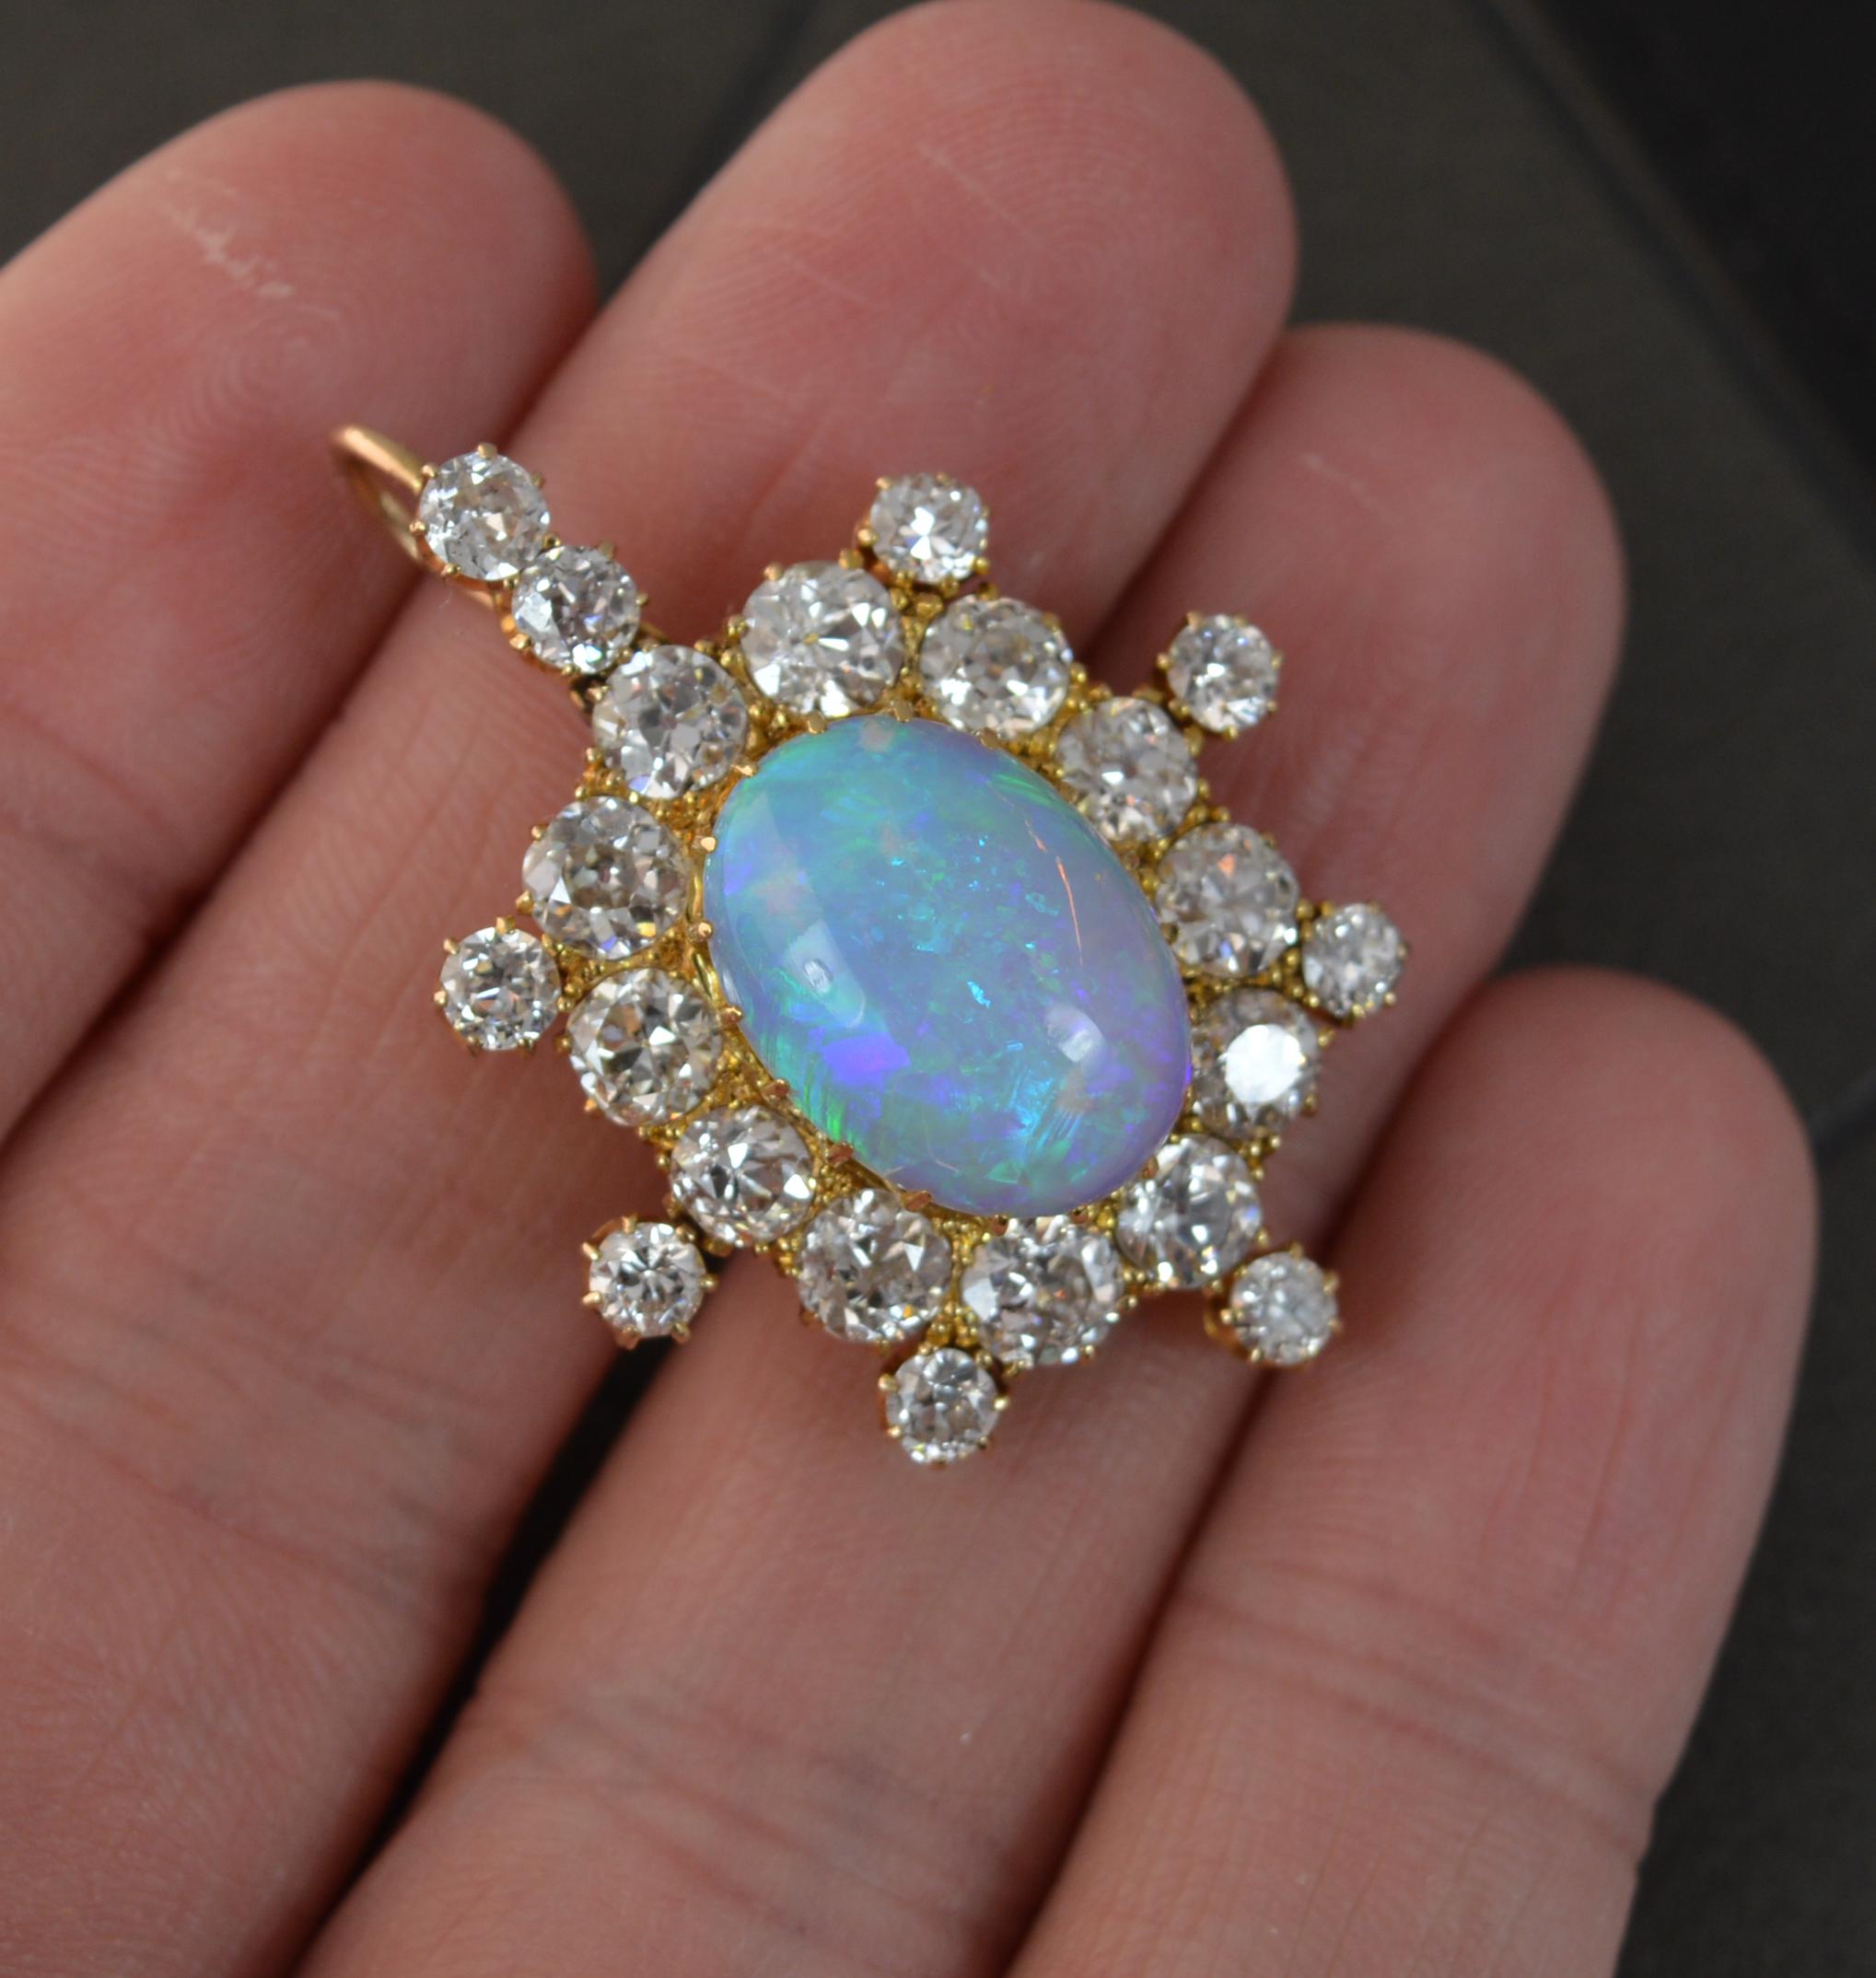 A stunning Victorian period pendant, circa 1880.
Solid 18 carat yellow gold example.
Designed with an oval shaped opal to centre, 10mm x 15mm approx. Full of colour throughout.
Surrounding are twelve large old European cut diamonds with an